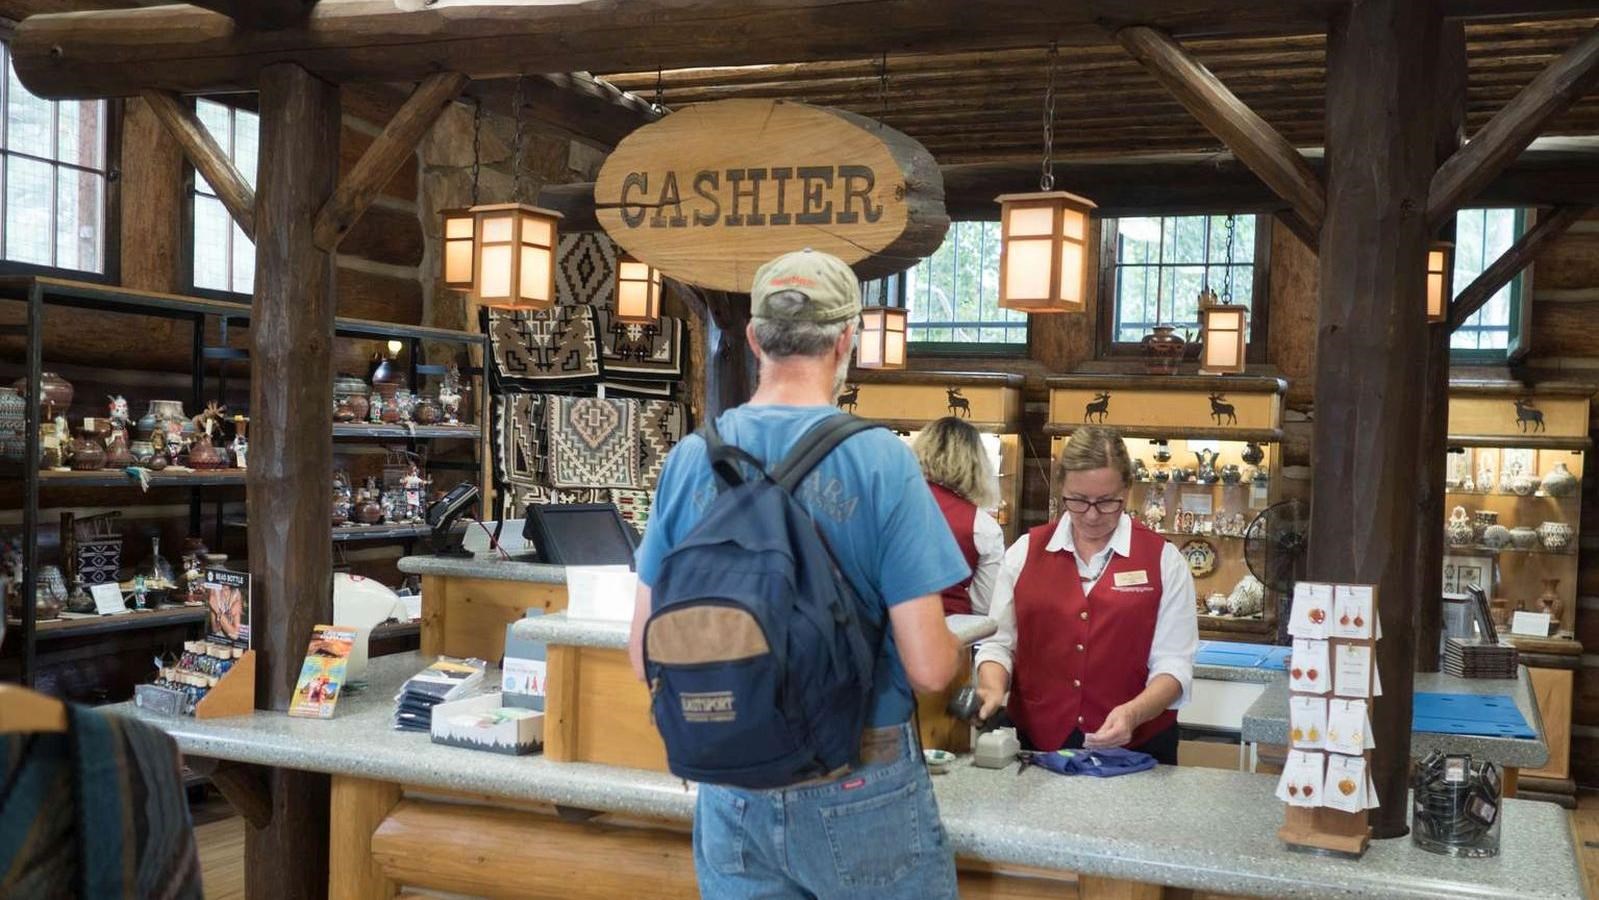 A person checks out at a counter in the middle of a large gift shop with exposed wood highlights